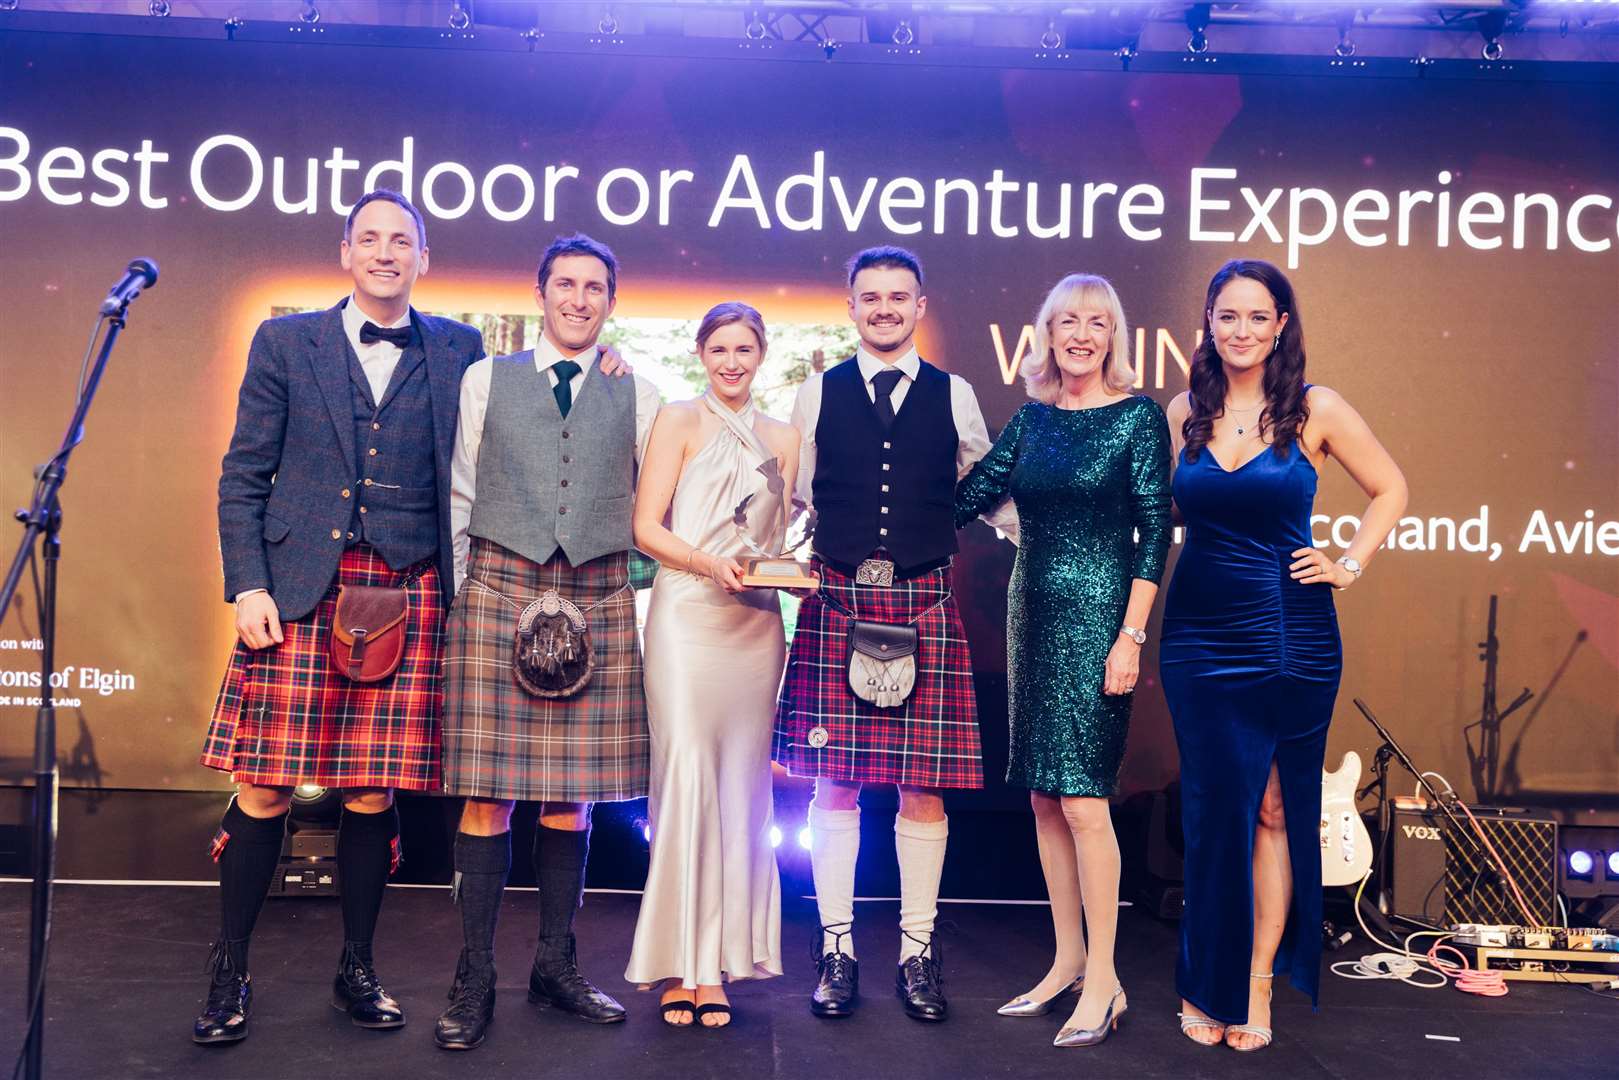 Aviemore-based Wilderness Scotland won awards for best outdoor or adventure experience as well as the climate action prize. Picture: Connor Mollison